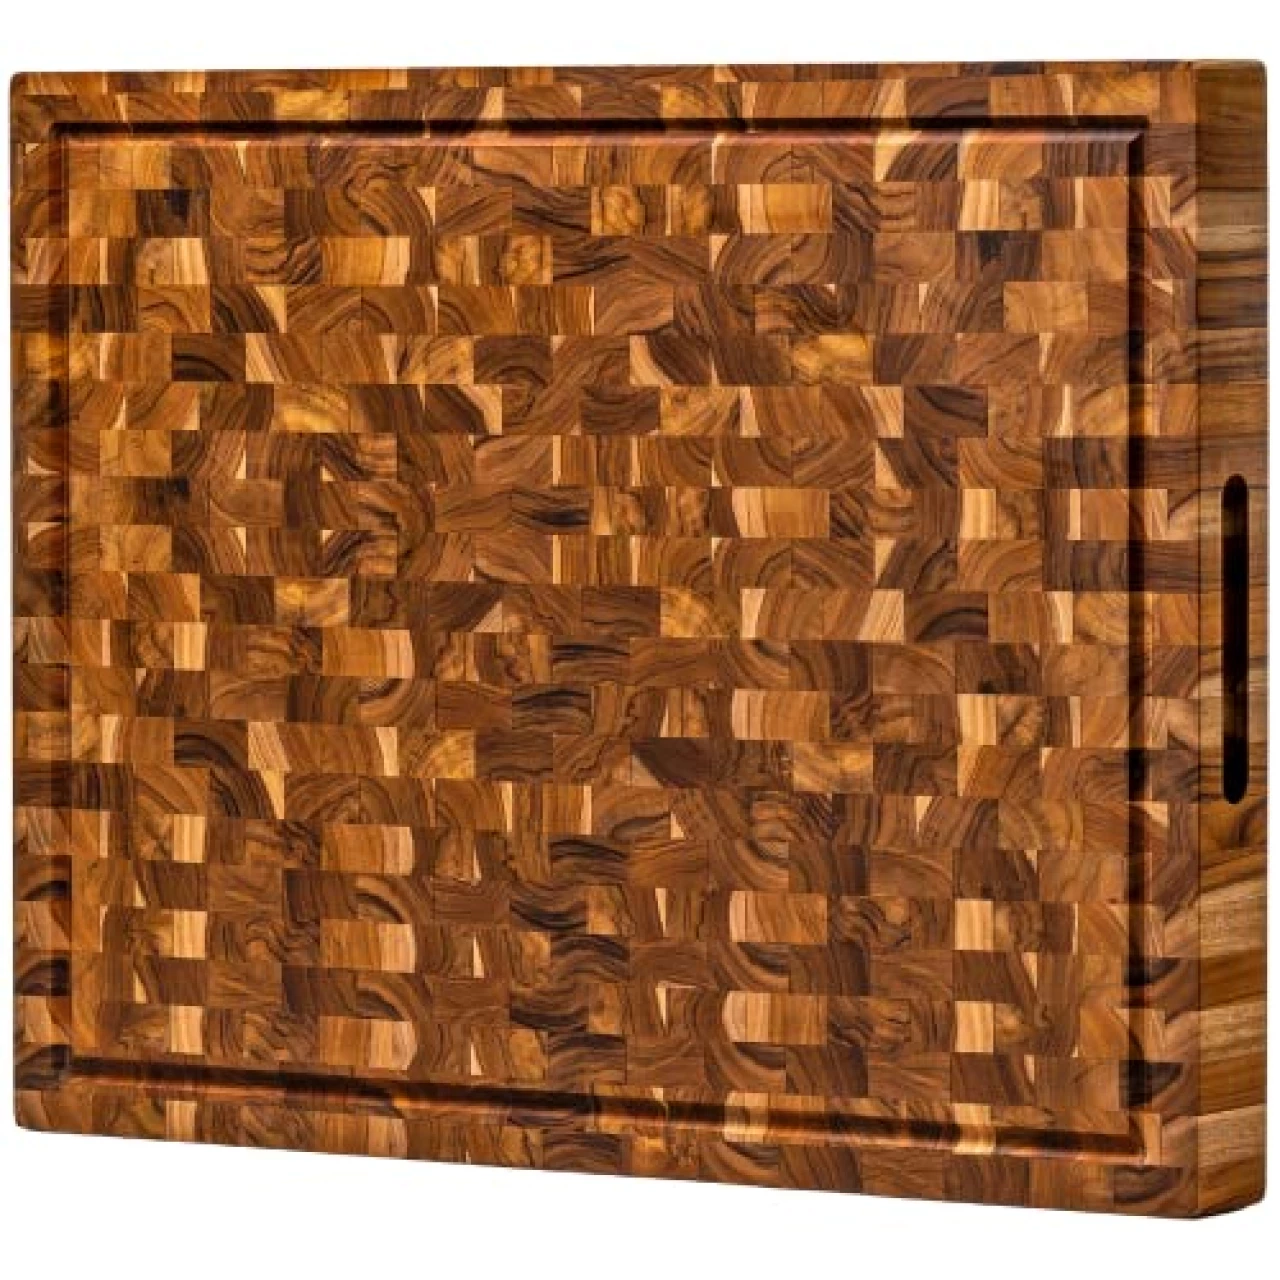 XXL End Grain Butcher Block Cutting Board [2&quot; Thick]. Made of Teak Wood and Conditioned with Beeswax, Linseed Oil &amp; Lemon Oil. 24&quot; x 18&quot; Chopping Board by Ziruma.